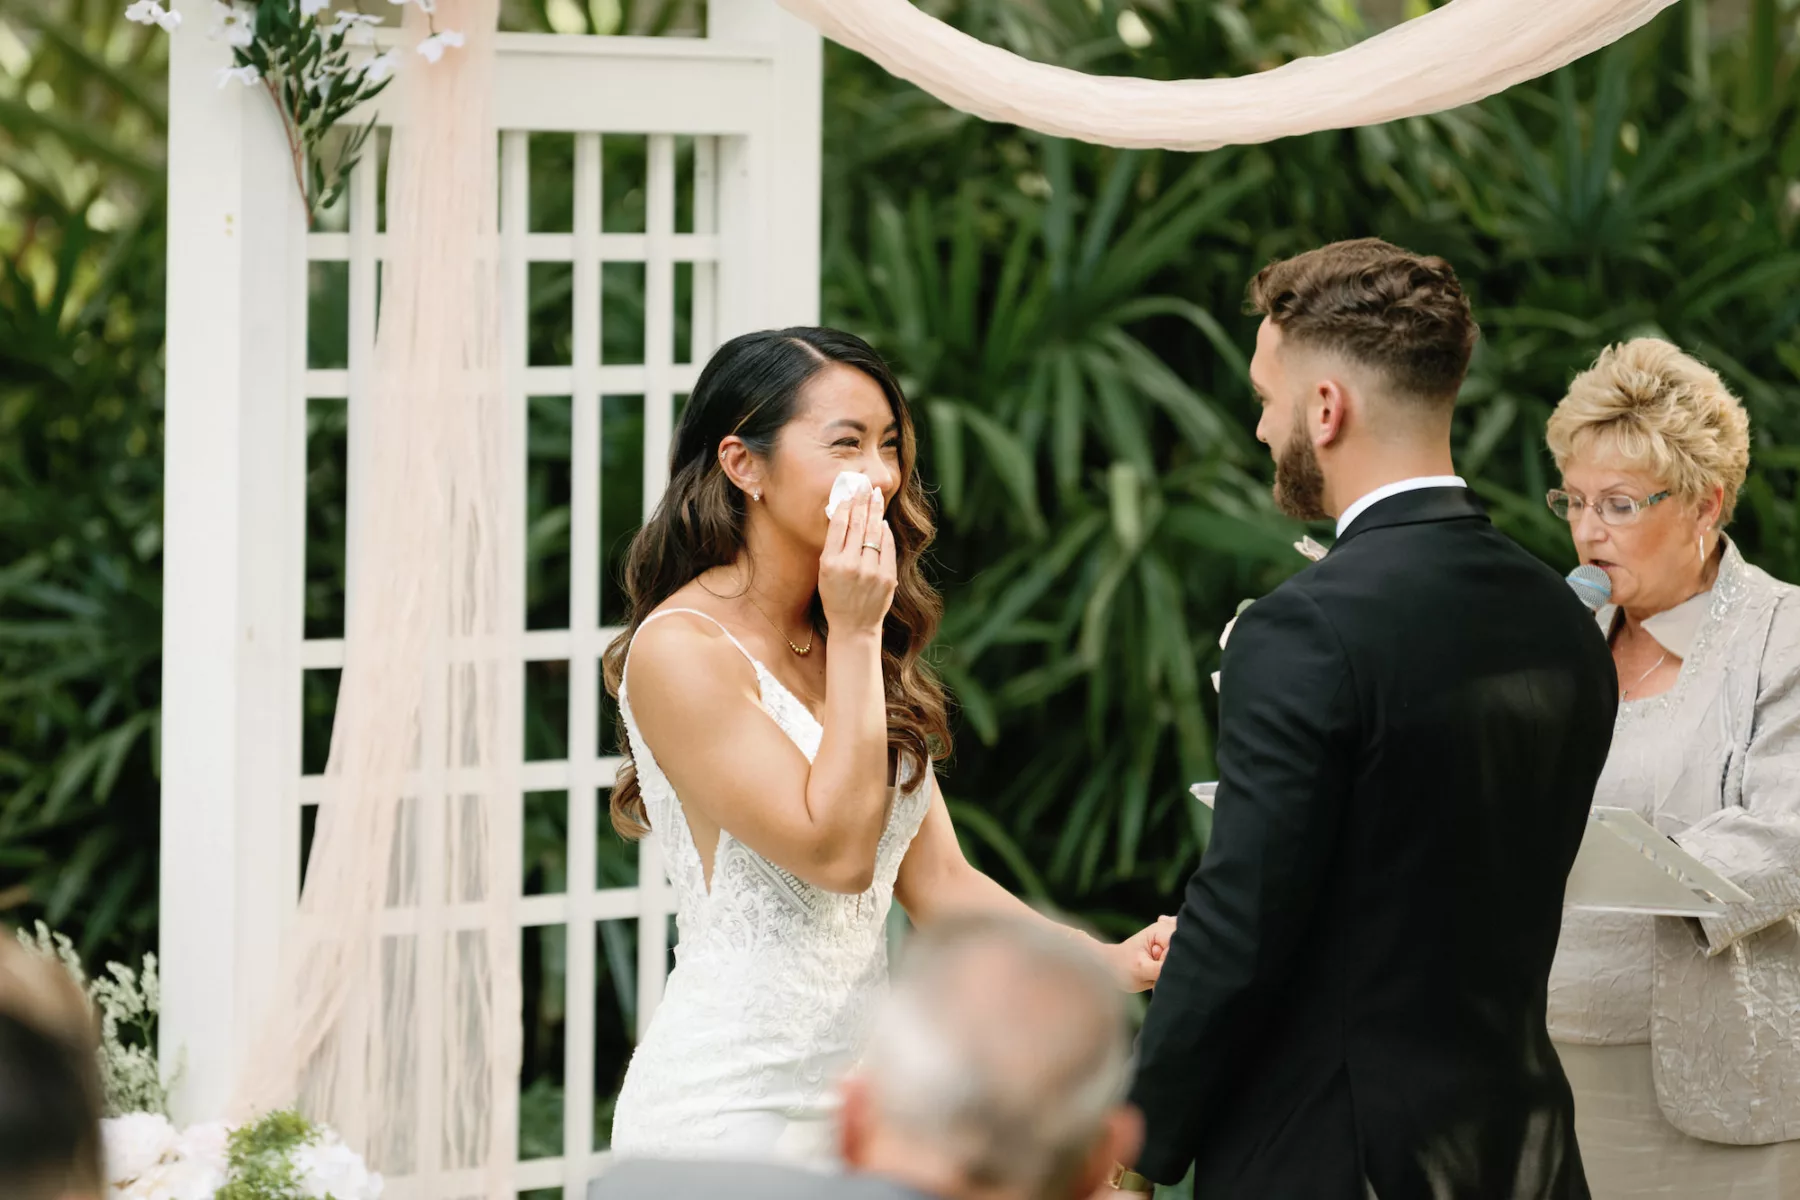 Bride and Groom Vow Exchange | Tampa Bay Officiant Weddings By Bonnie